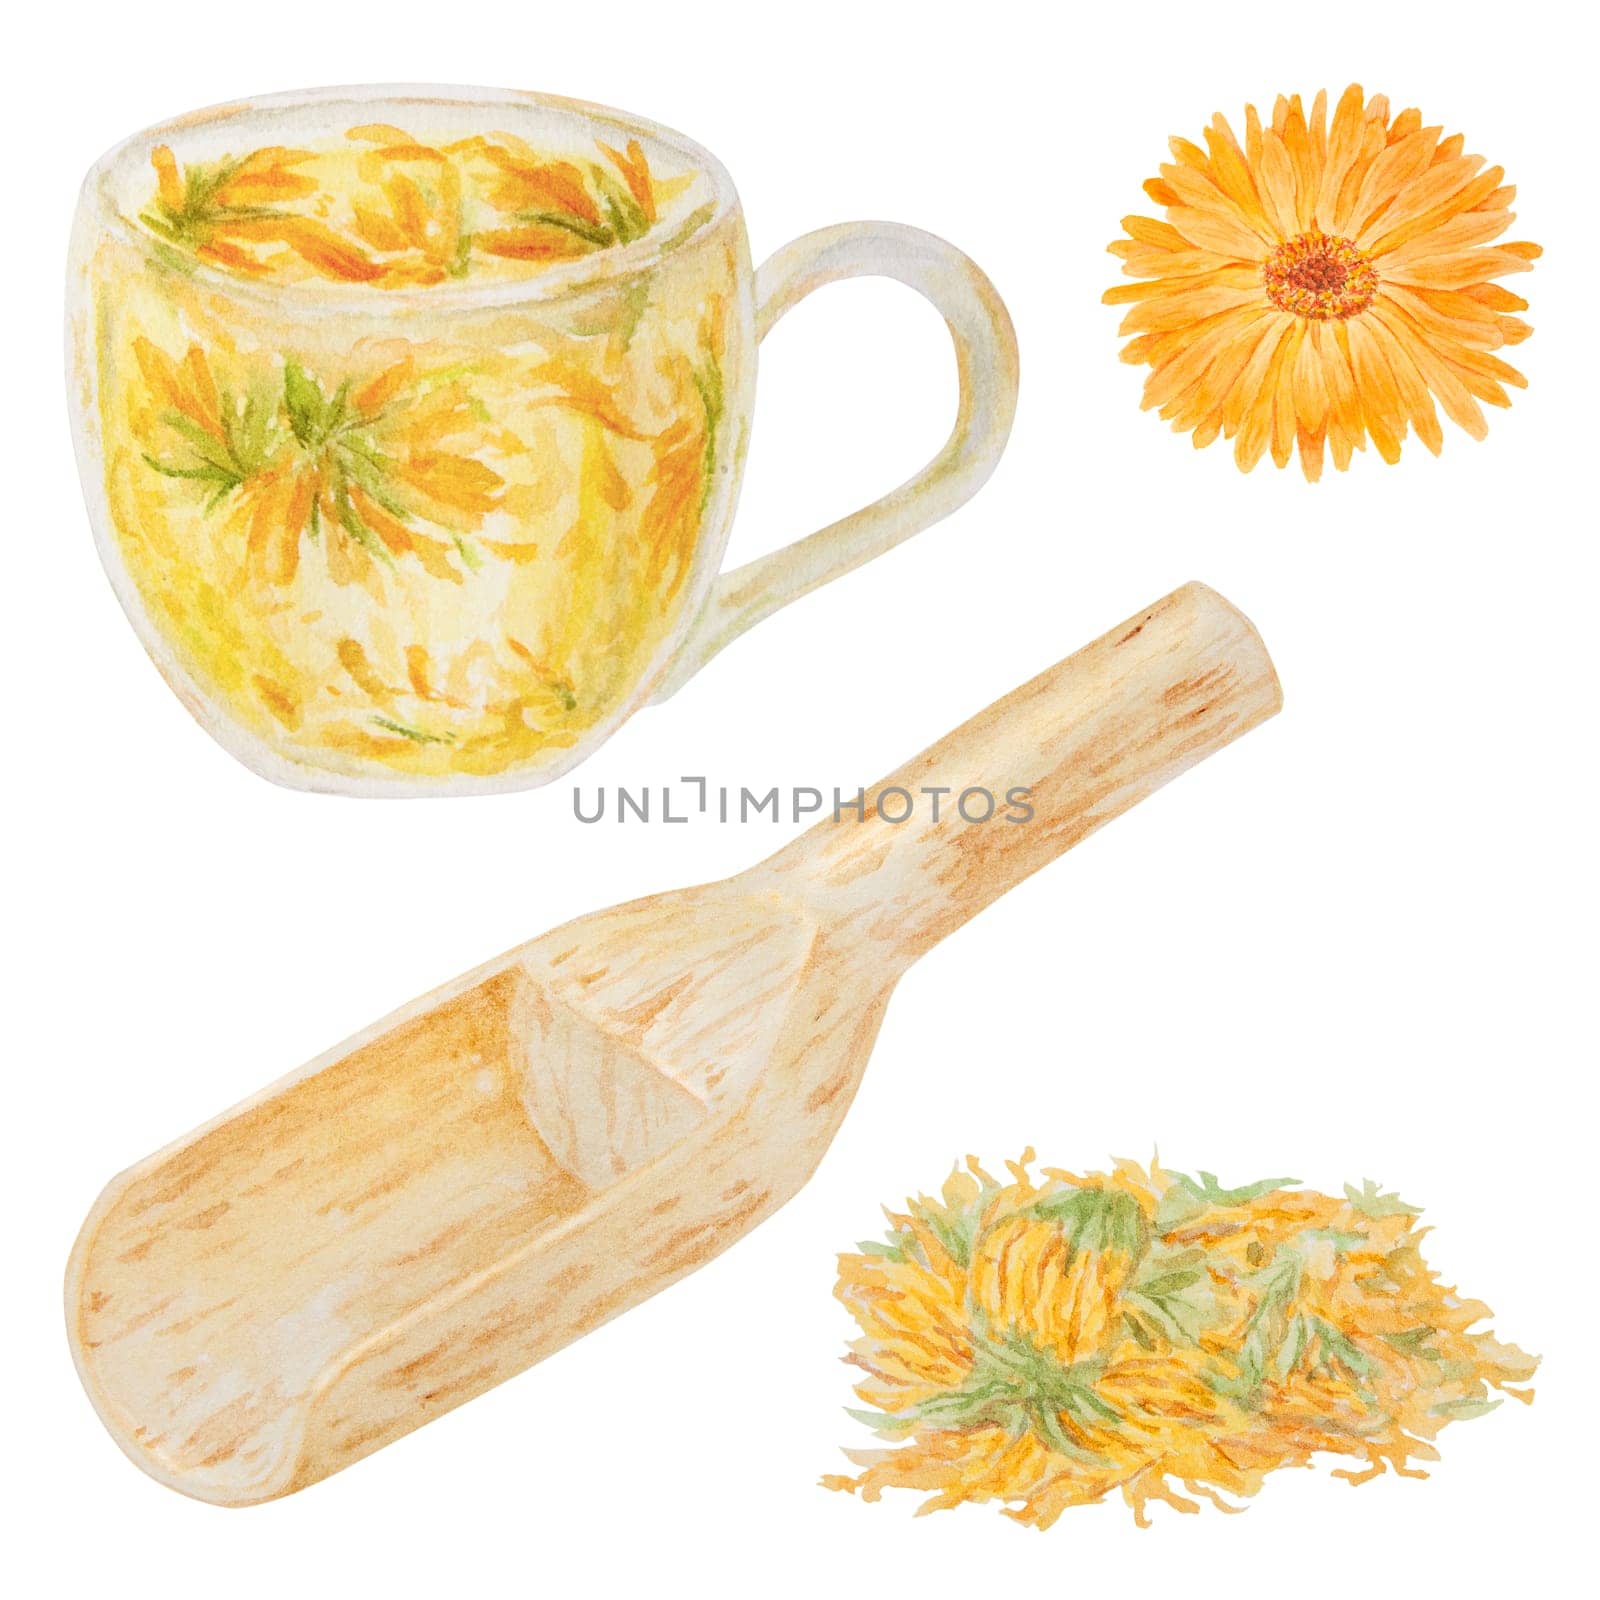 Orange calendula officinalis in wooden scoop for bulk products and cup of tea. Set of watercolor hand drawn illustration. Sunny ruddles flower with yellow petals and green leaves for natural herbal medicine, healthy tea, cosmetics and homeopatic remedies. Marigold botanical clip art good as an element for packaging design, labels, eco goods, textile, invitations